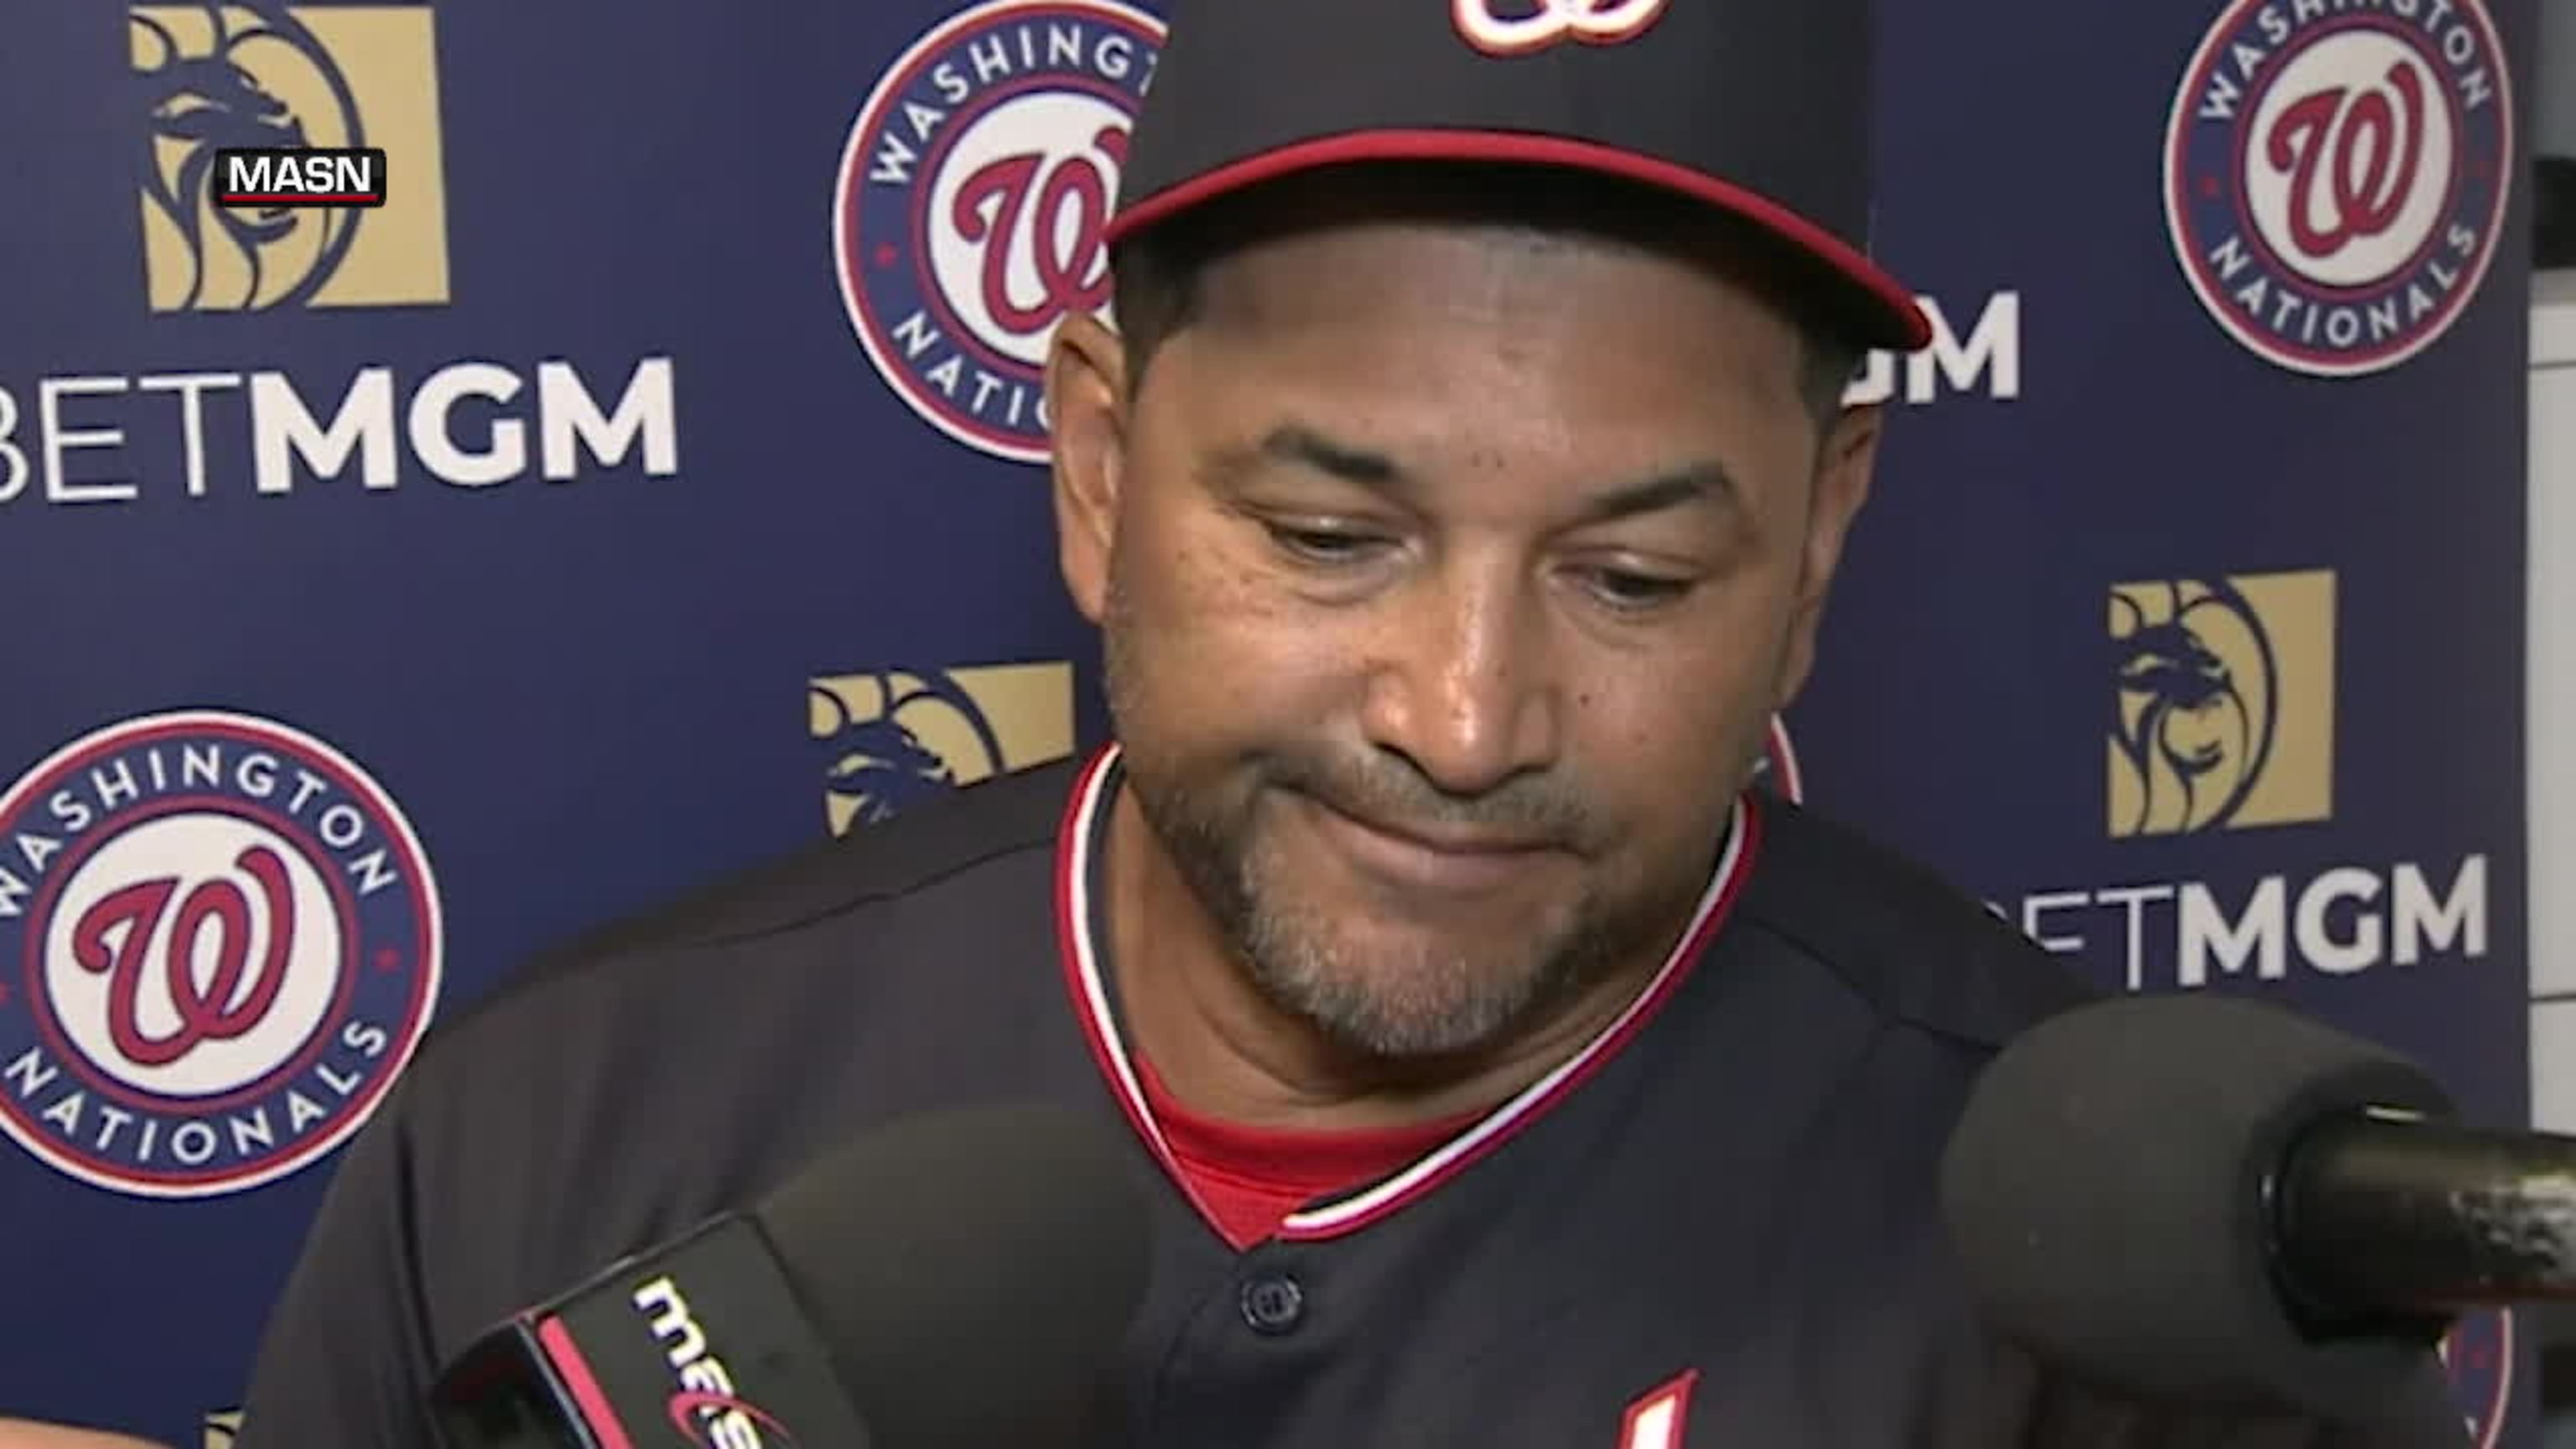 Washington Nationals on X: If you're gonna be looking at your